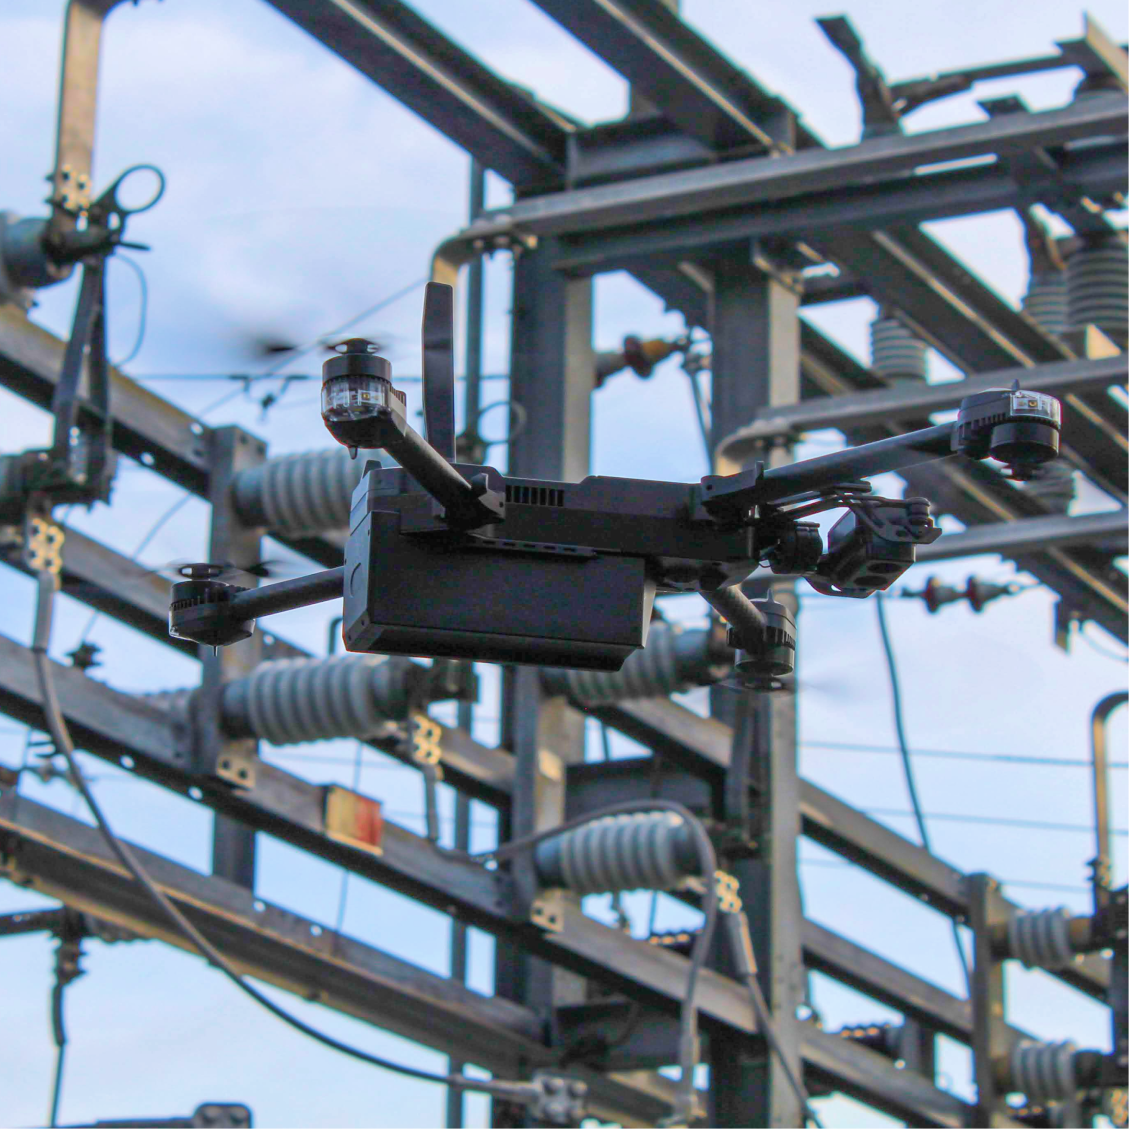 Skydio X2 drone remotely inspecting a power substation facility